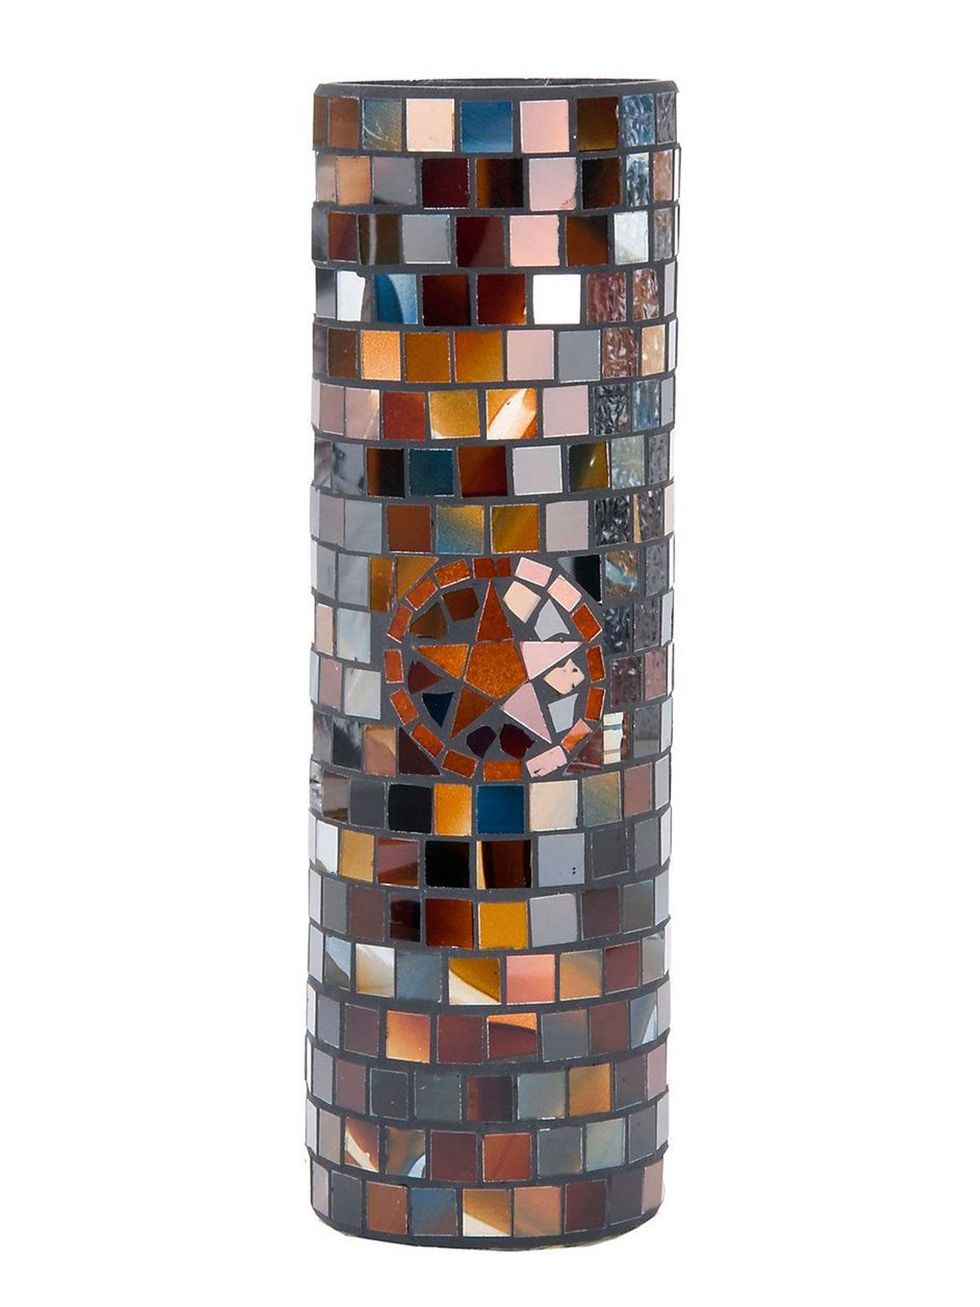 Rodeo Quick Fix March 2014 M&F Western Products Mosaic Star Tall Candle Vase